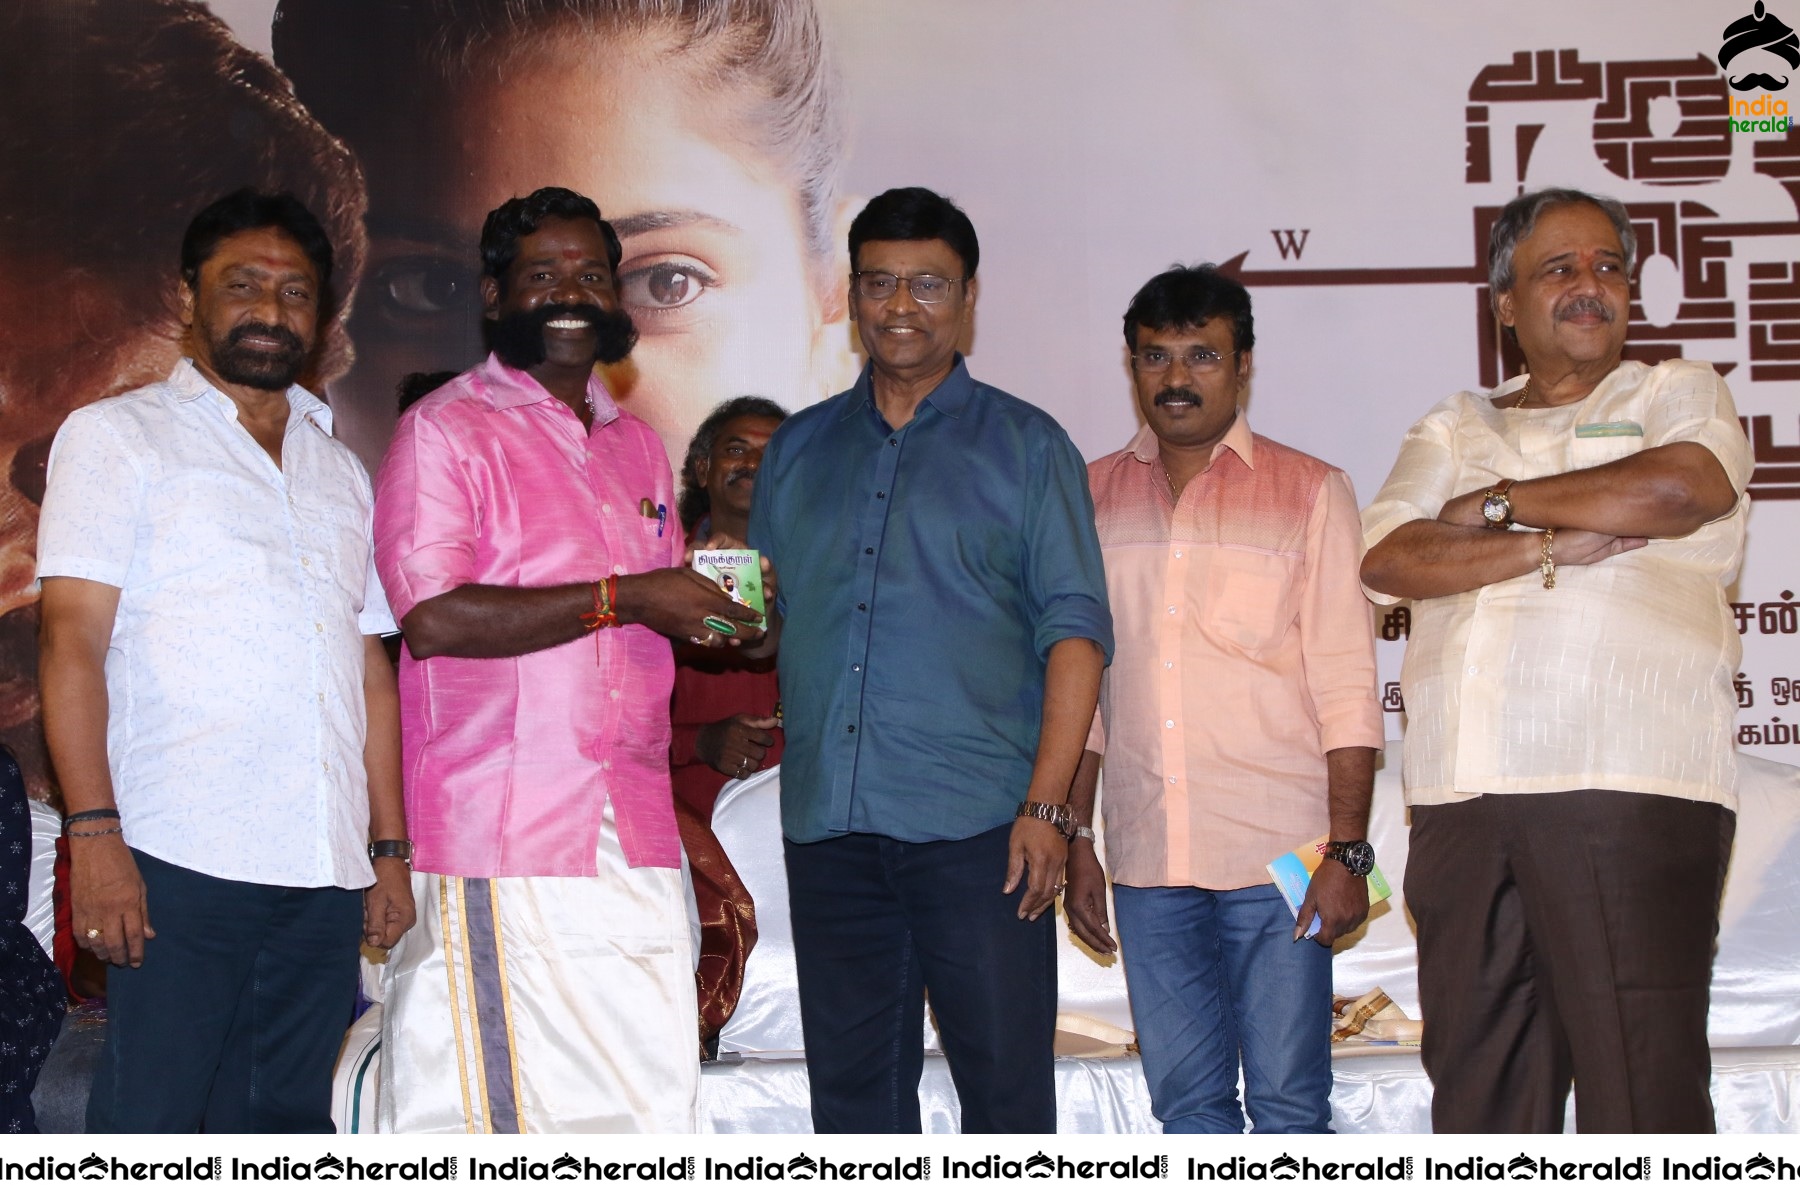 More Photos from Thedu Audio Launch and Trailer event Set 2